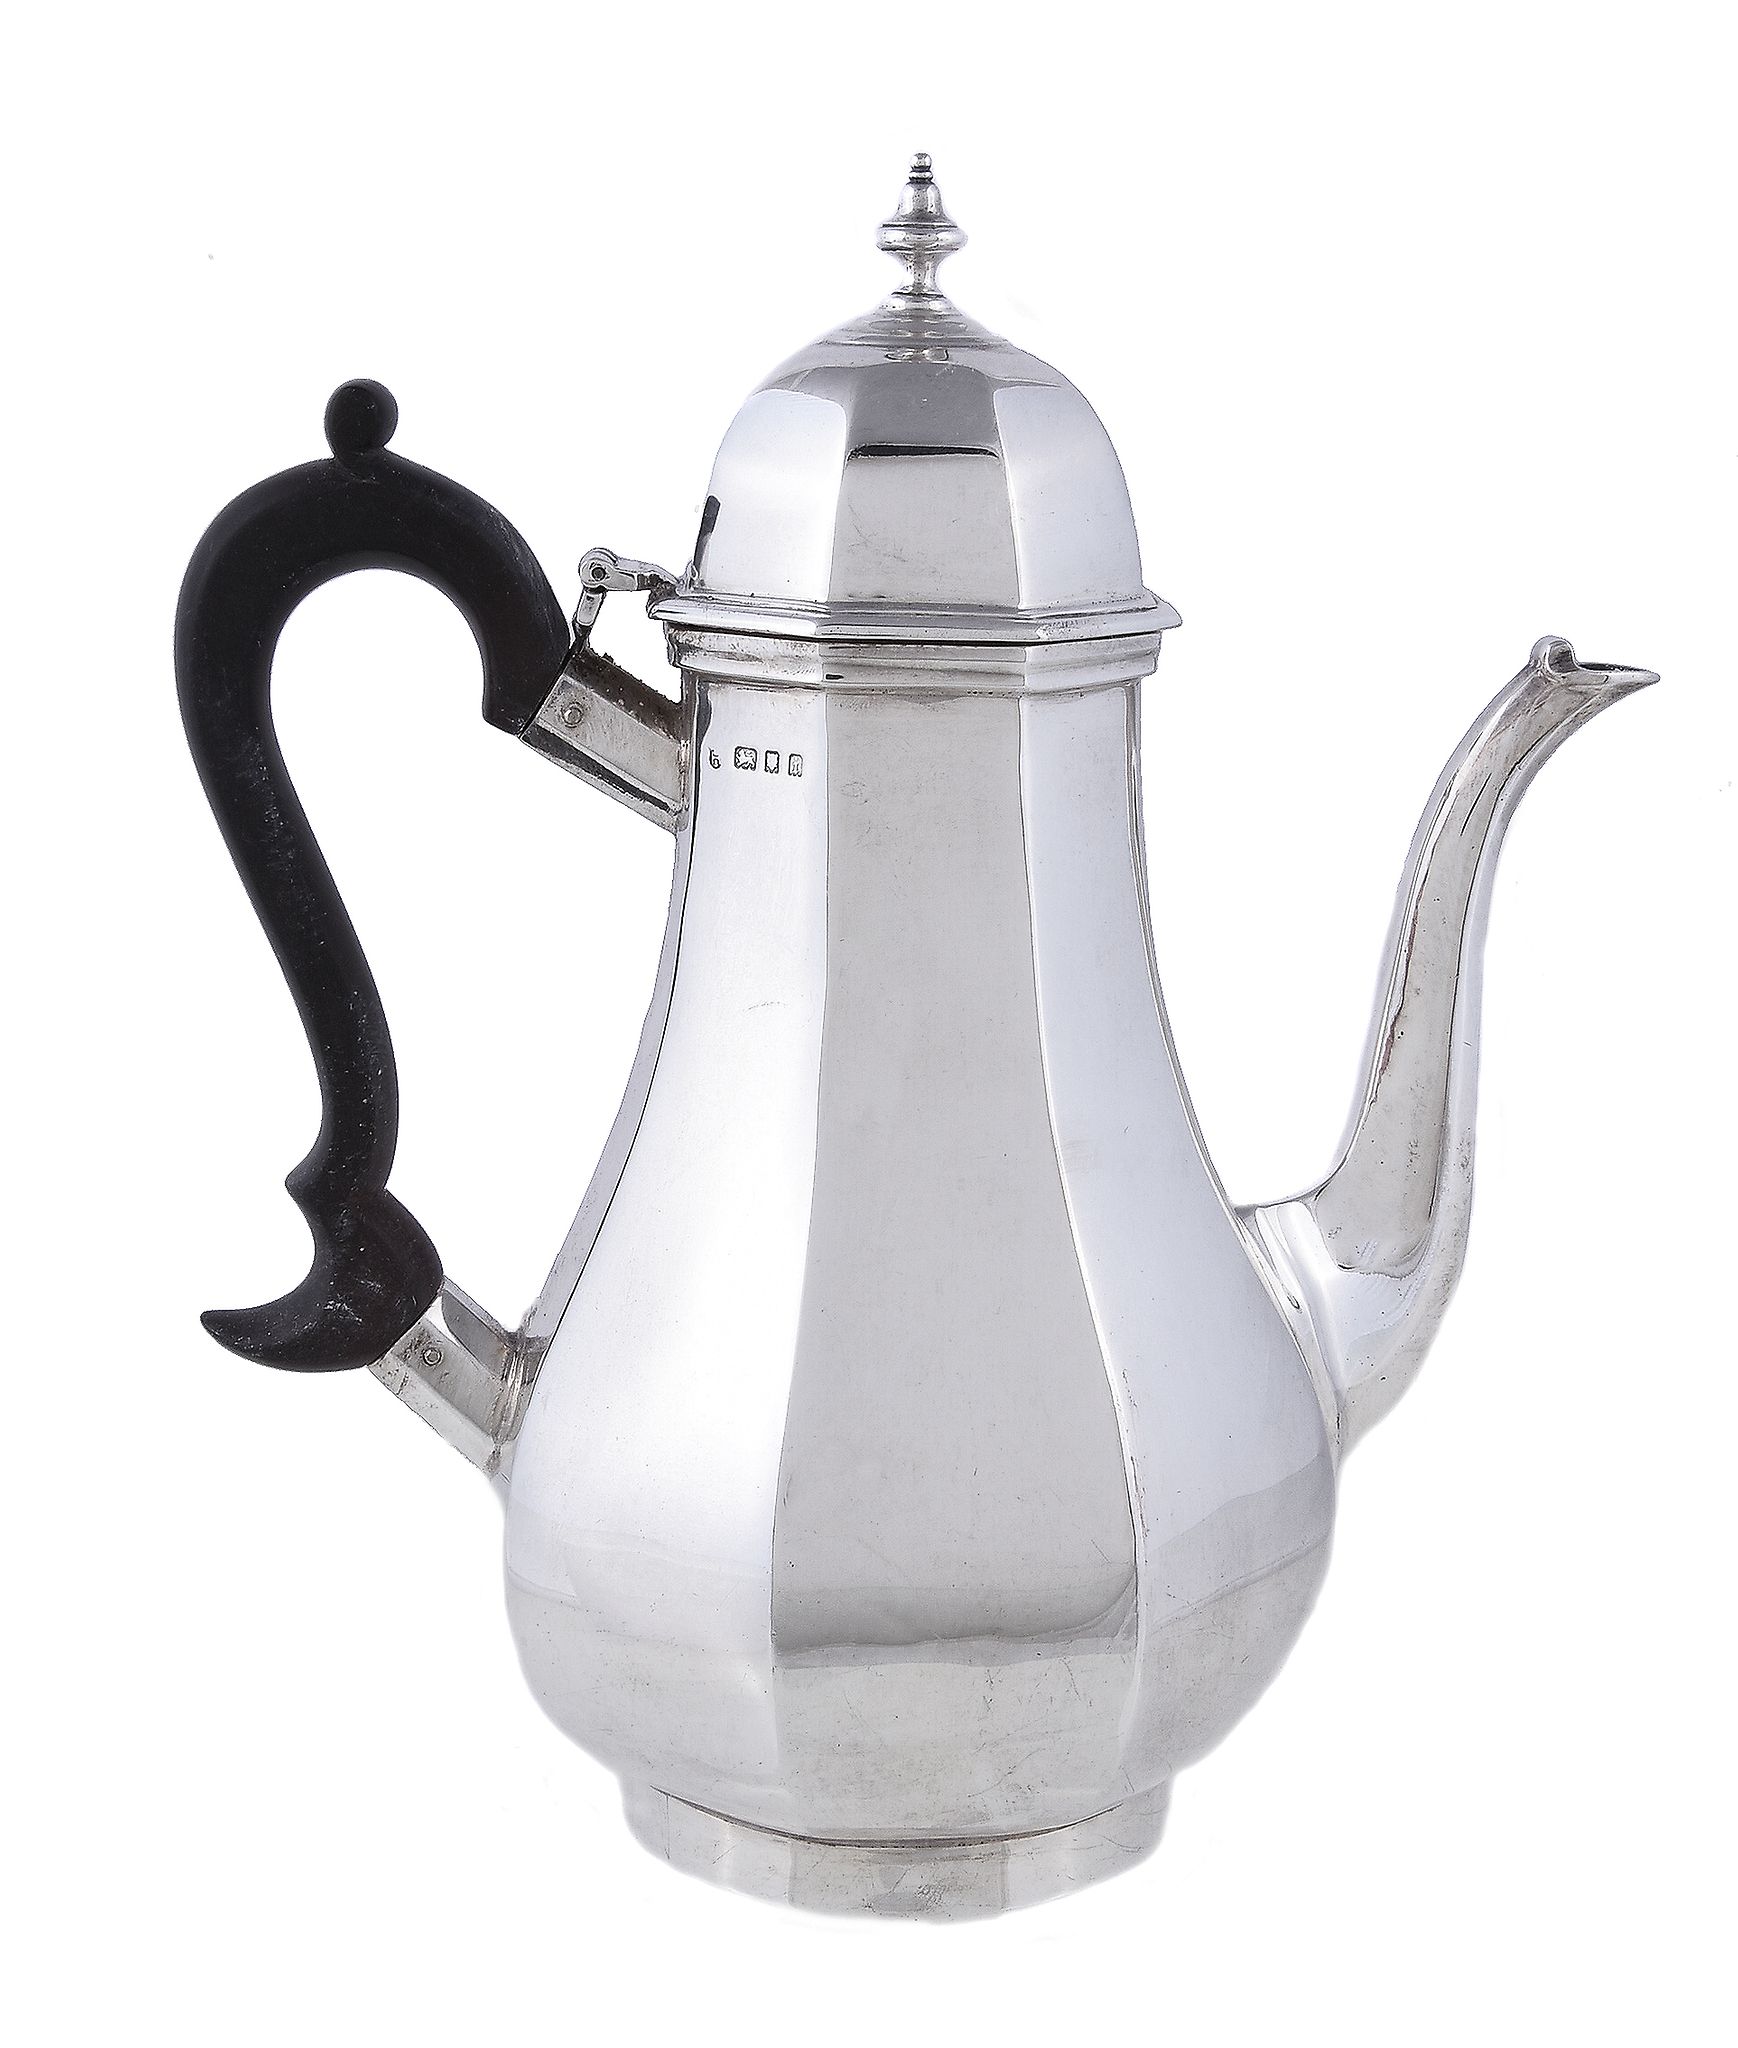 A silver octagonal baluster coffee pot by C. S. Harris & Sons Ltd., London 1924, with a bell shaped